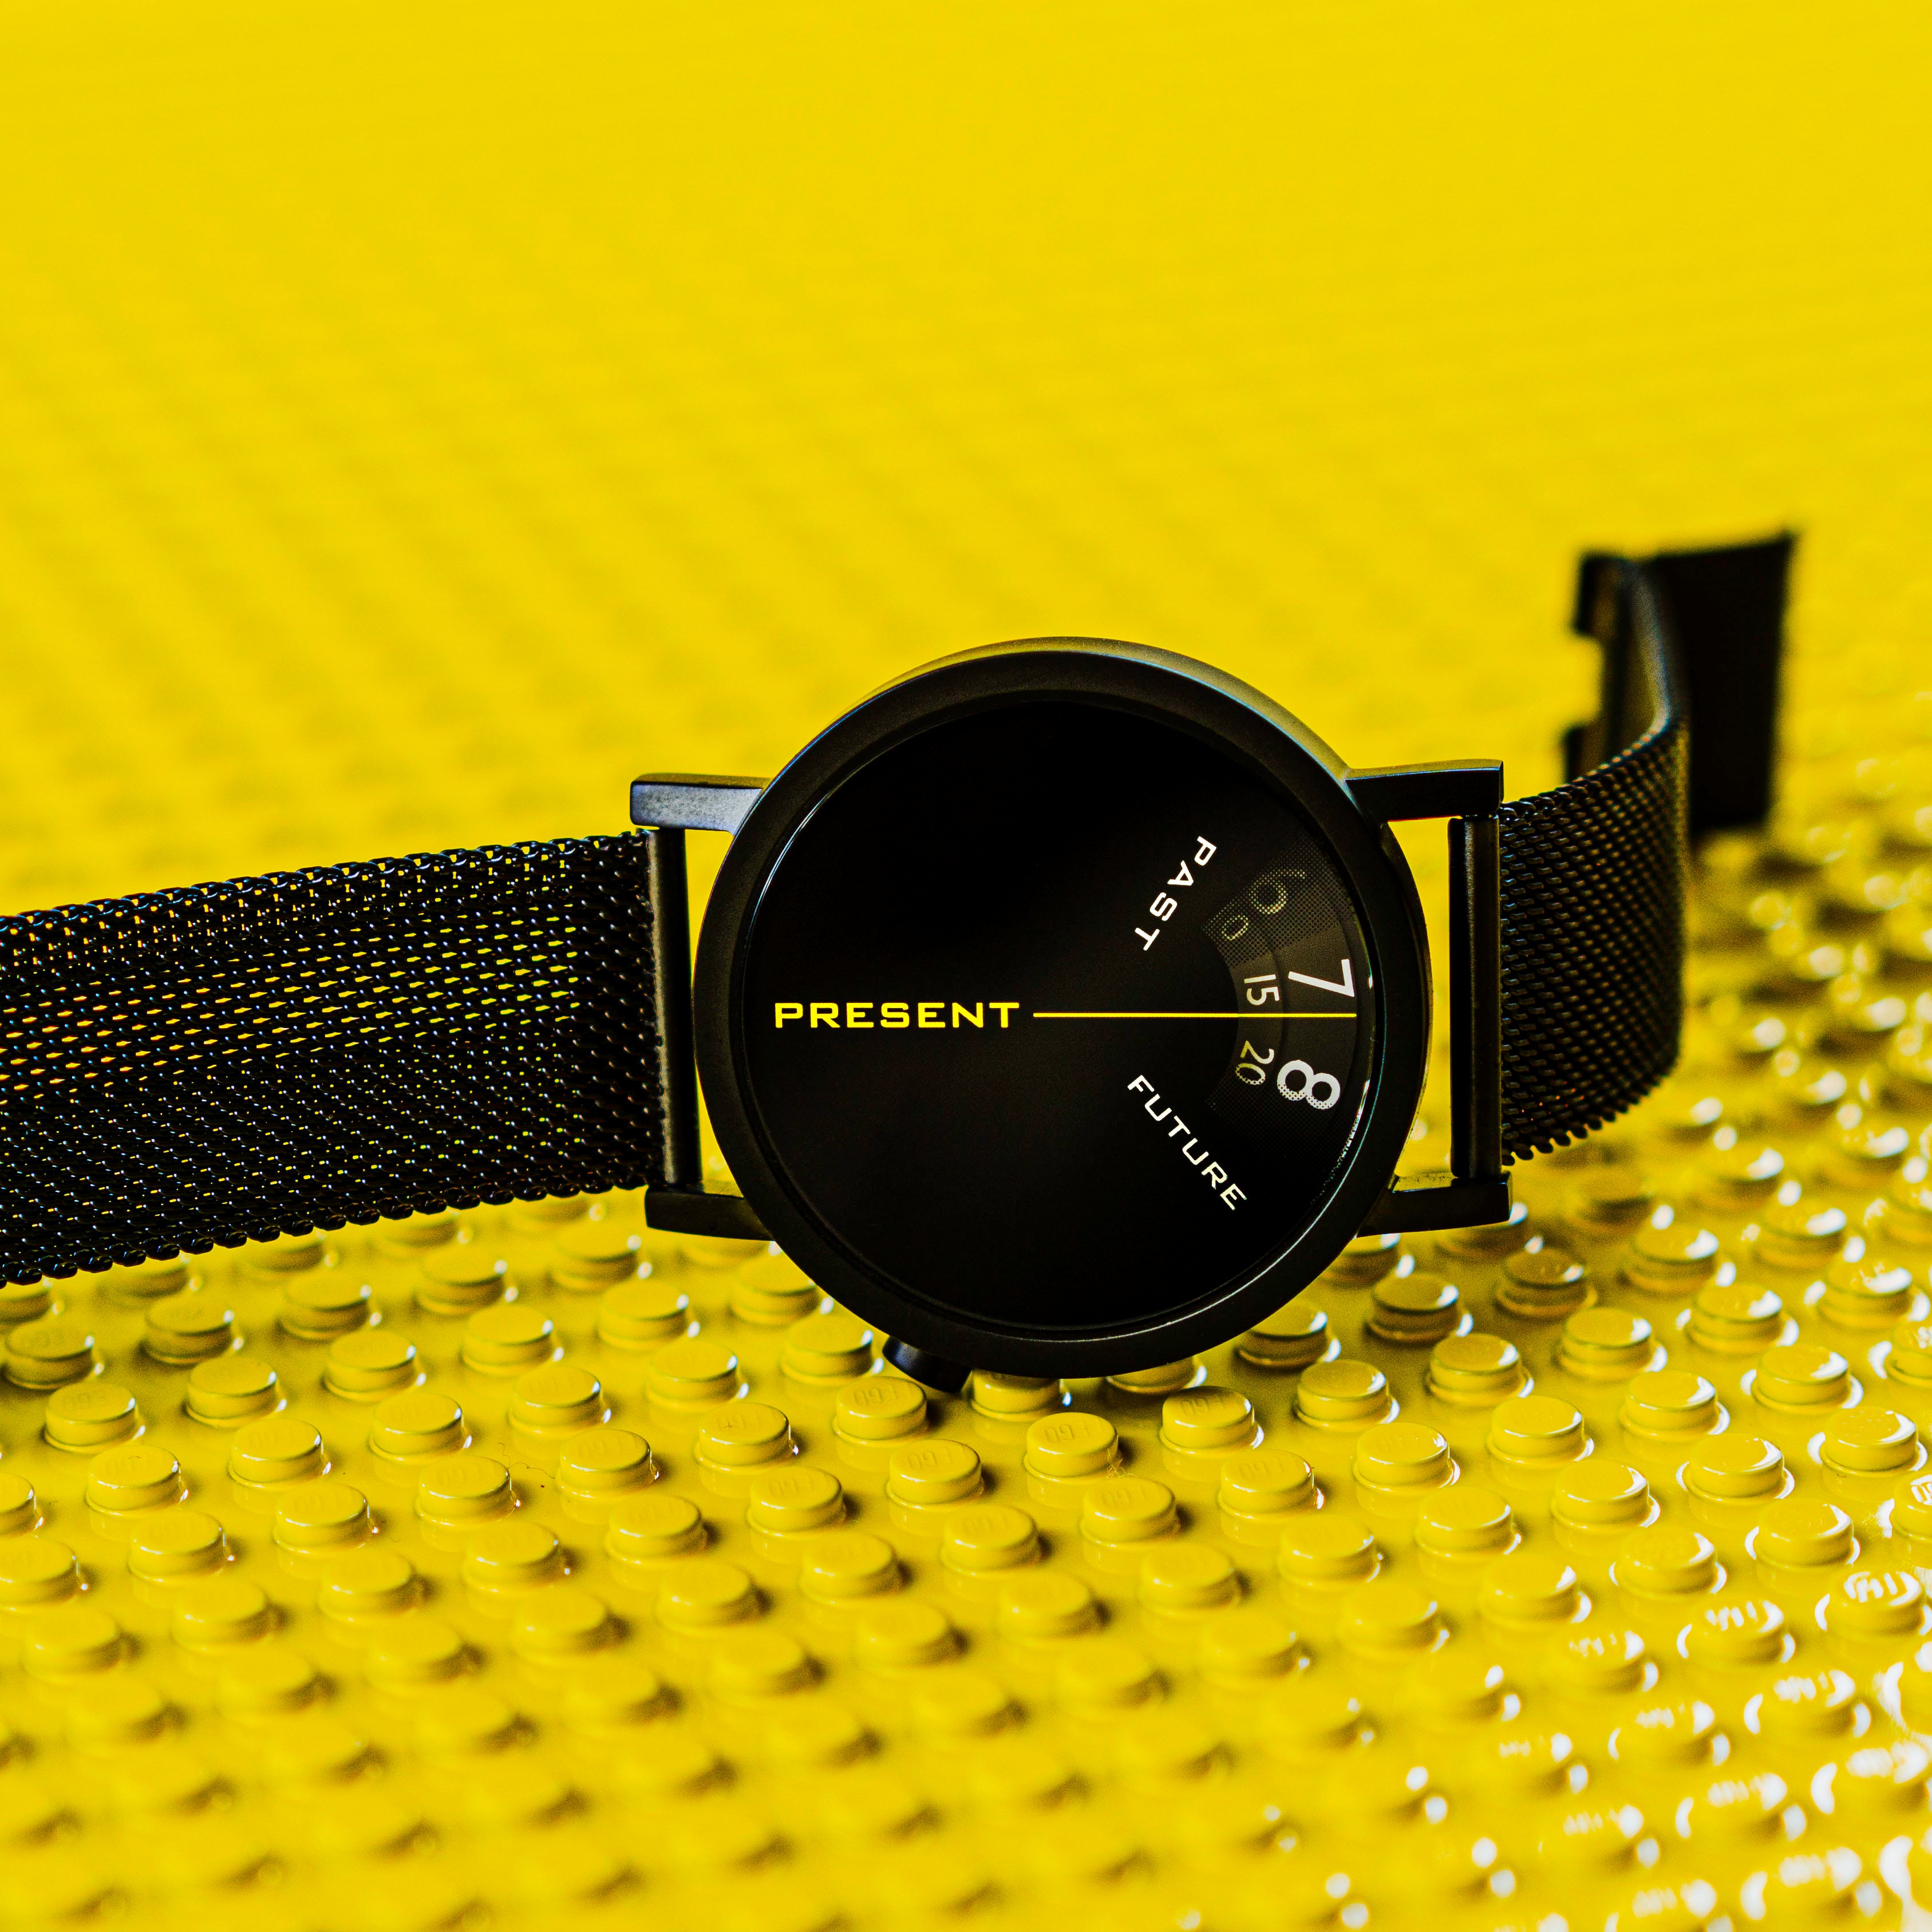 Eutour Magnet Watch: Where Minimalist Design Meets Futuristic Charm.  Innovation Party Awesome Products V7 | by Saygin Celen | Innovation Party |  Medium